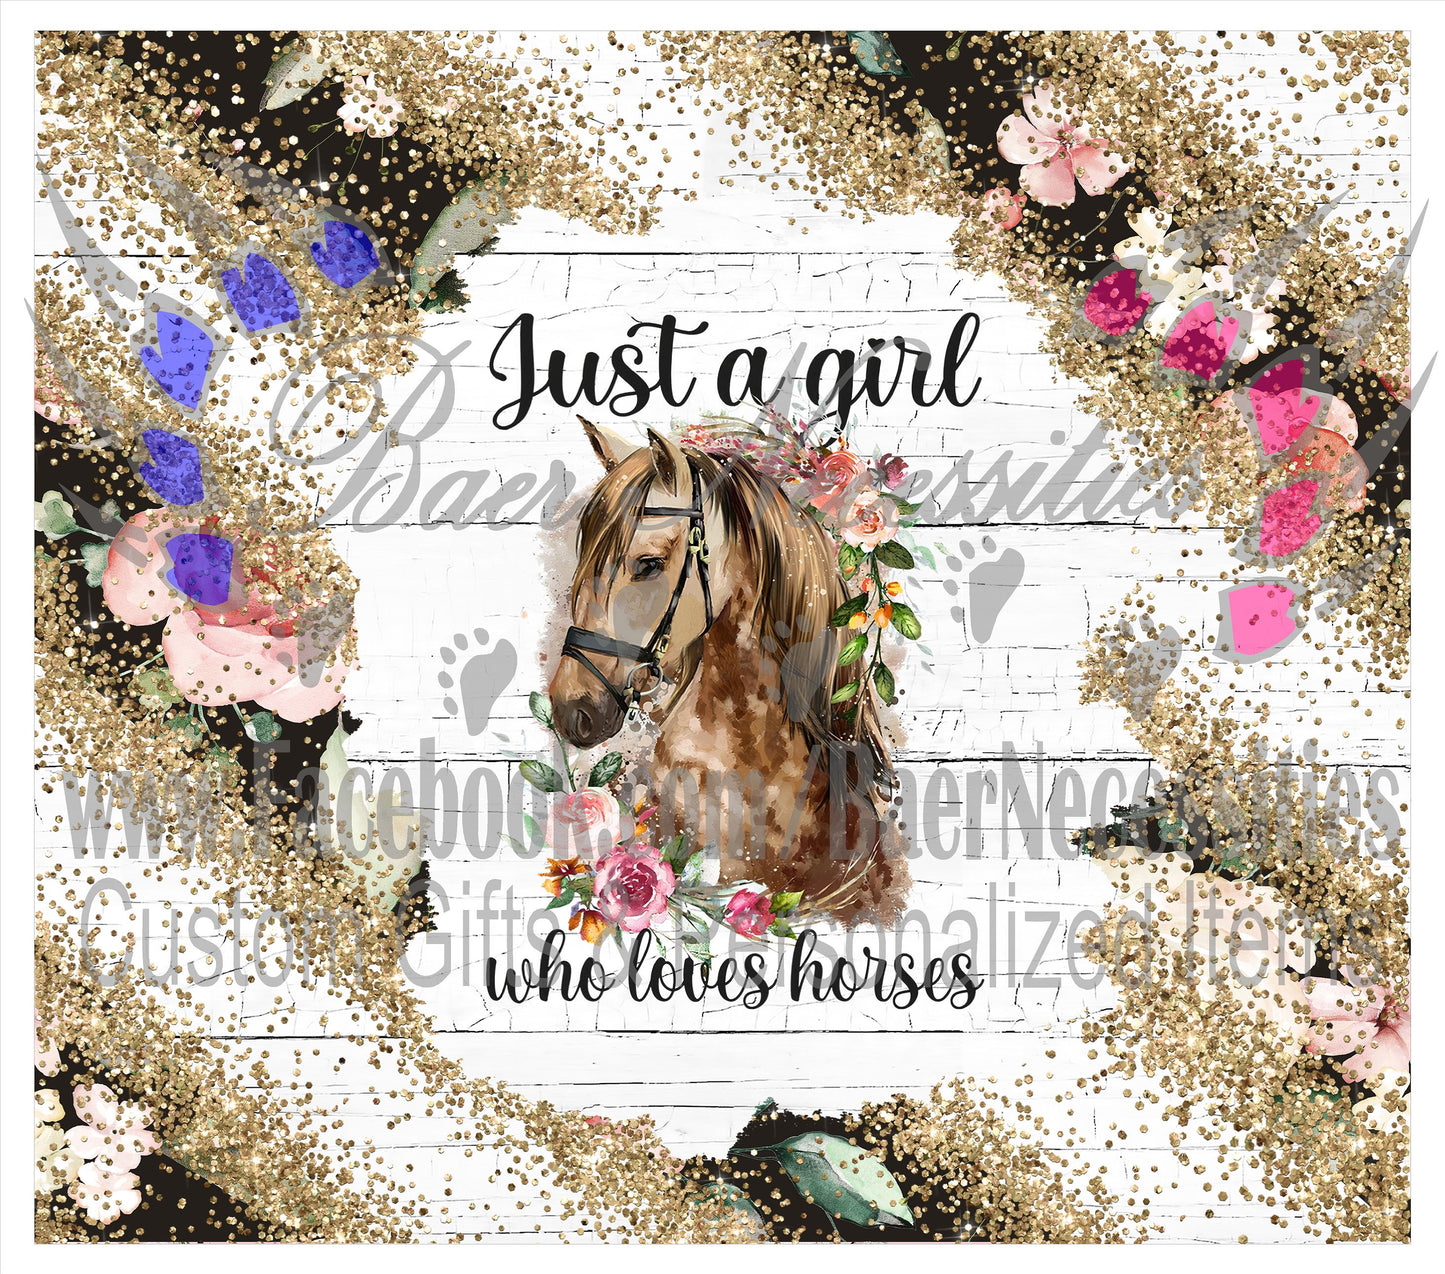 Just a girl who loves horses - Full Wrap